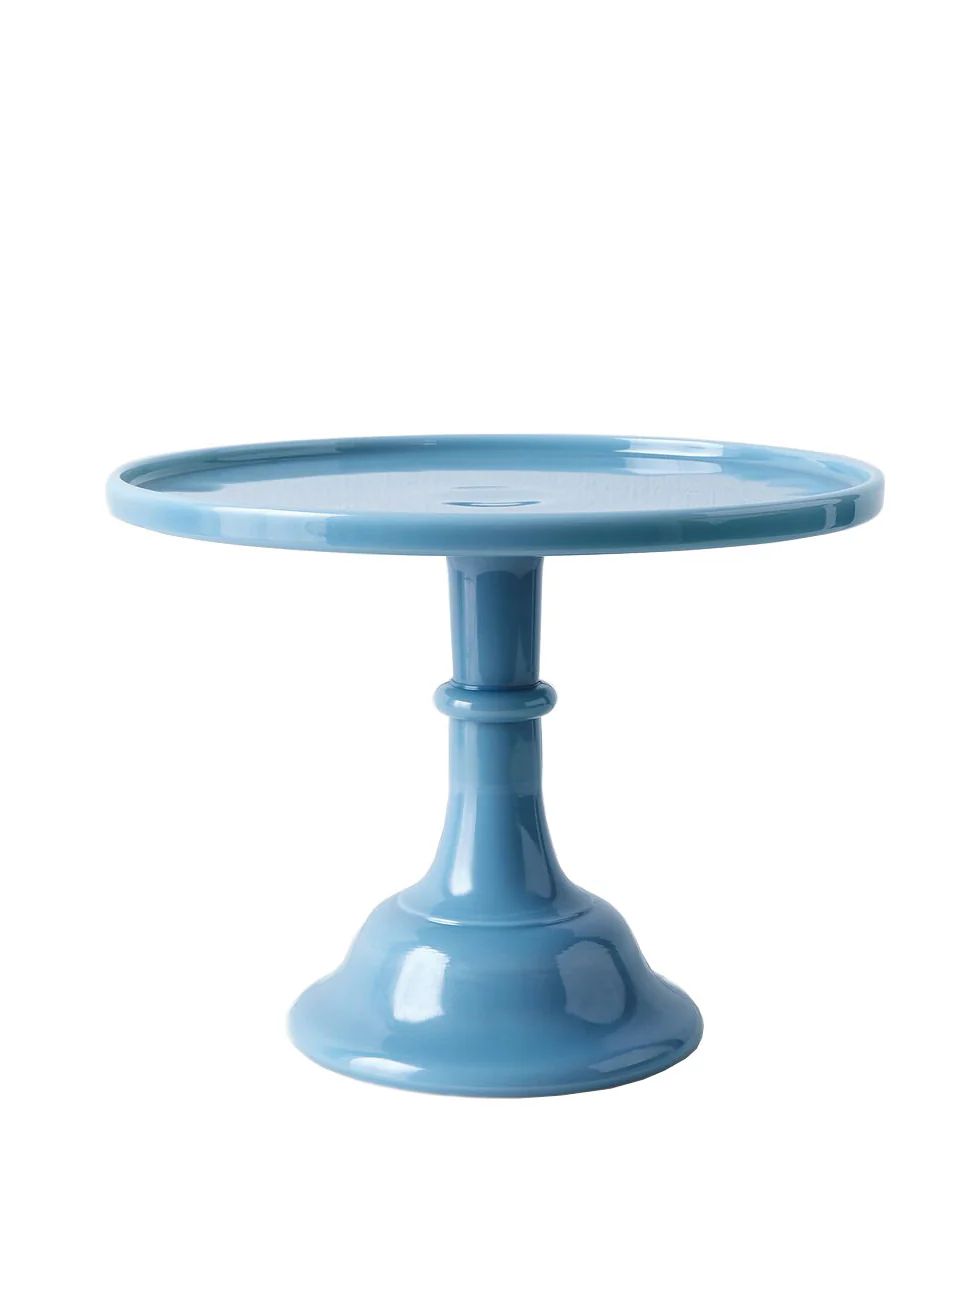 10 Inch D Cake Stand | Weston Table